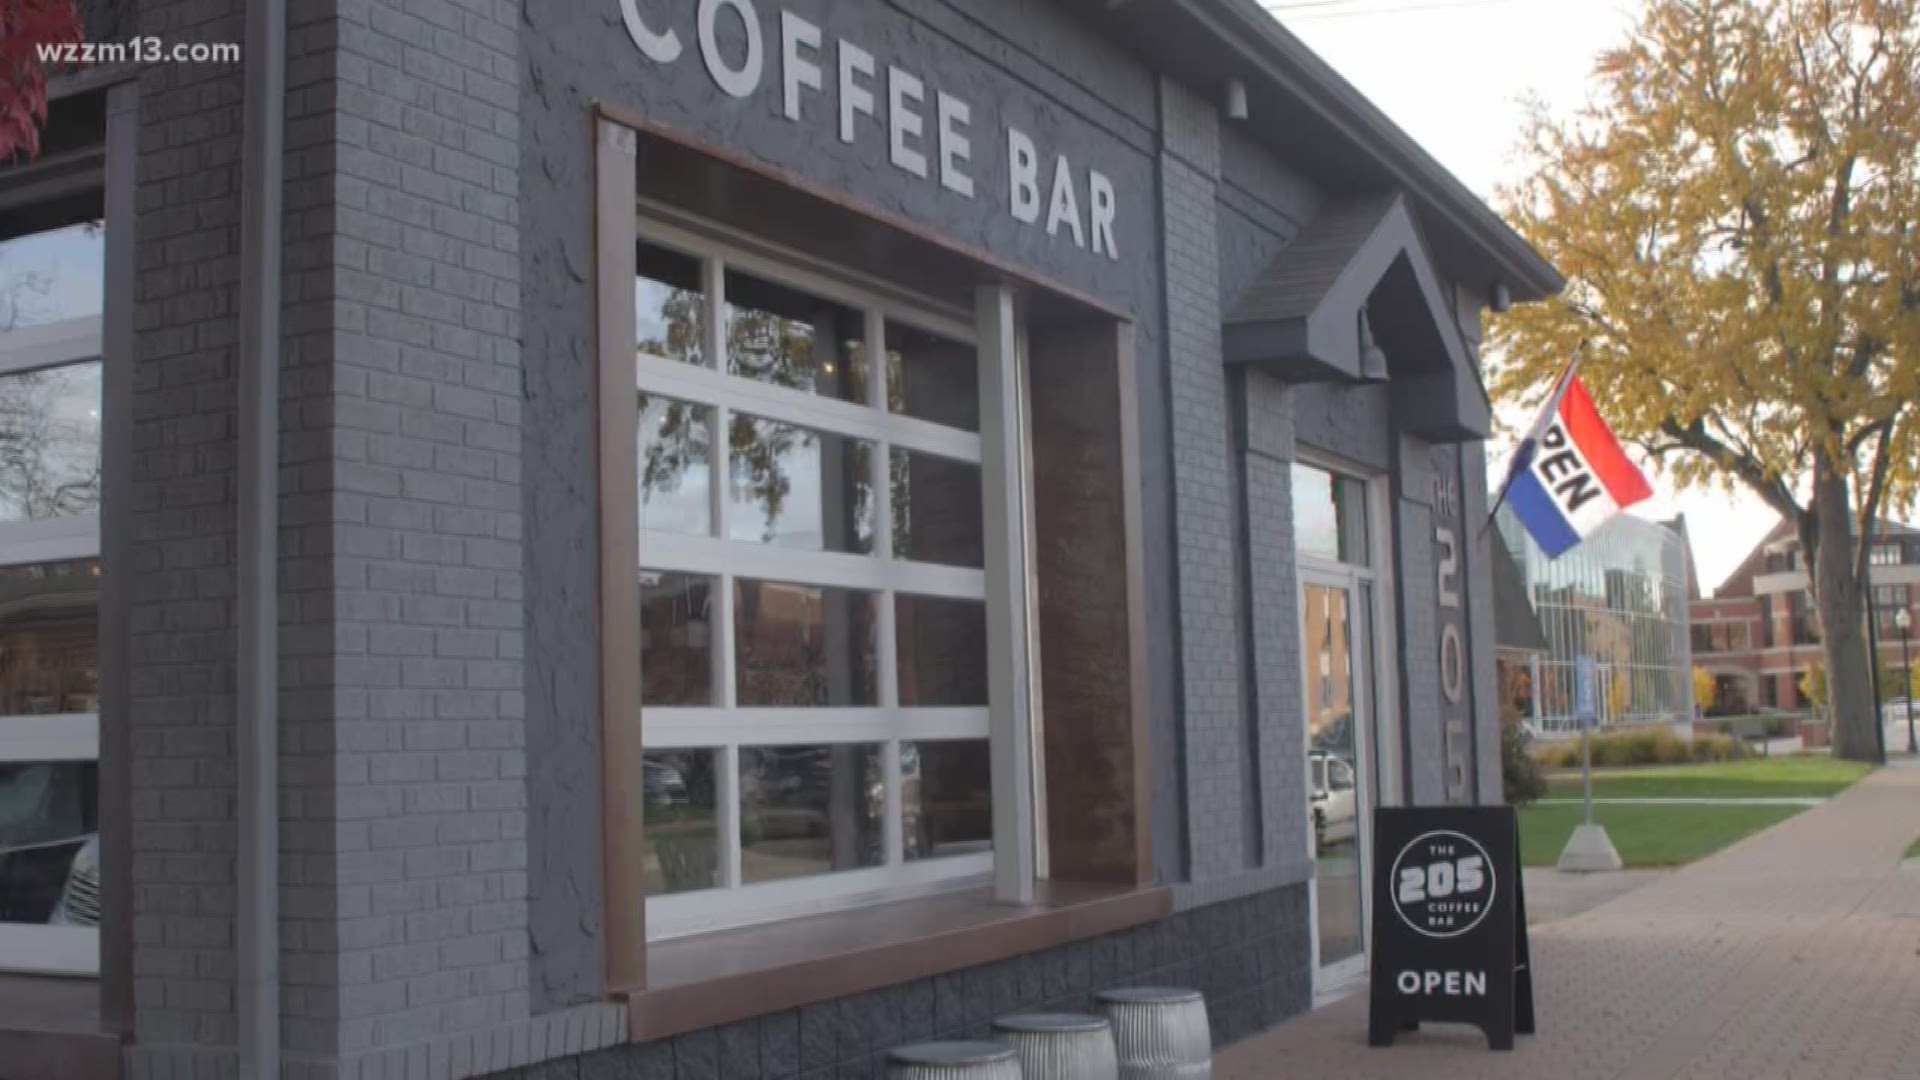 205 Coffee Bar in Holland expands